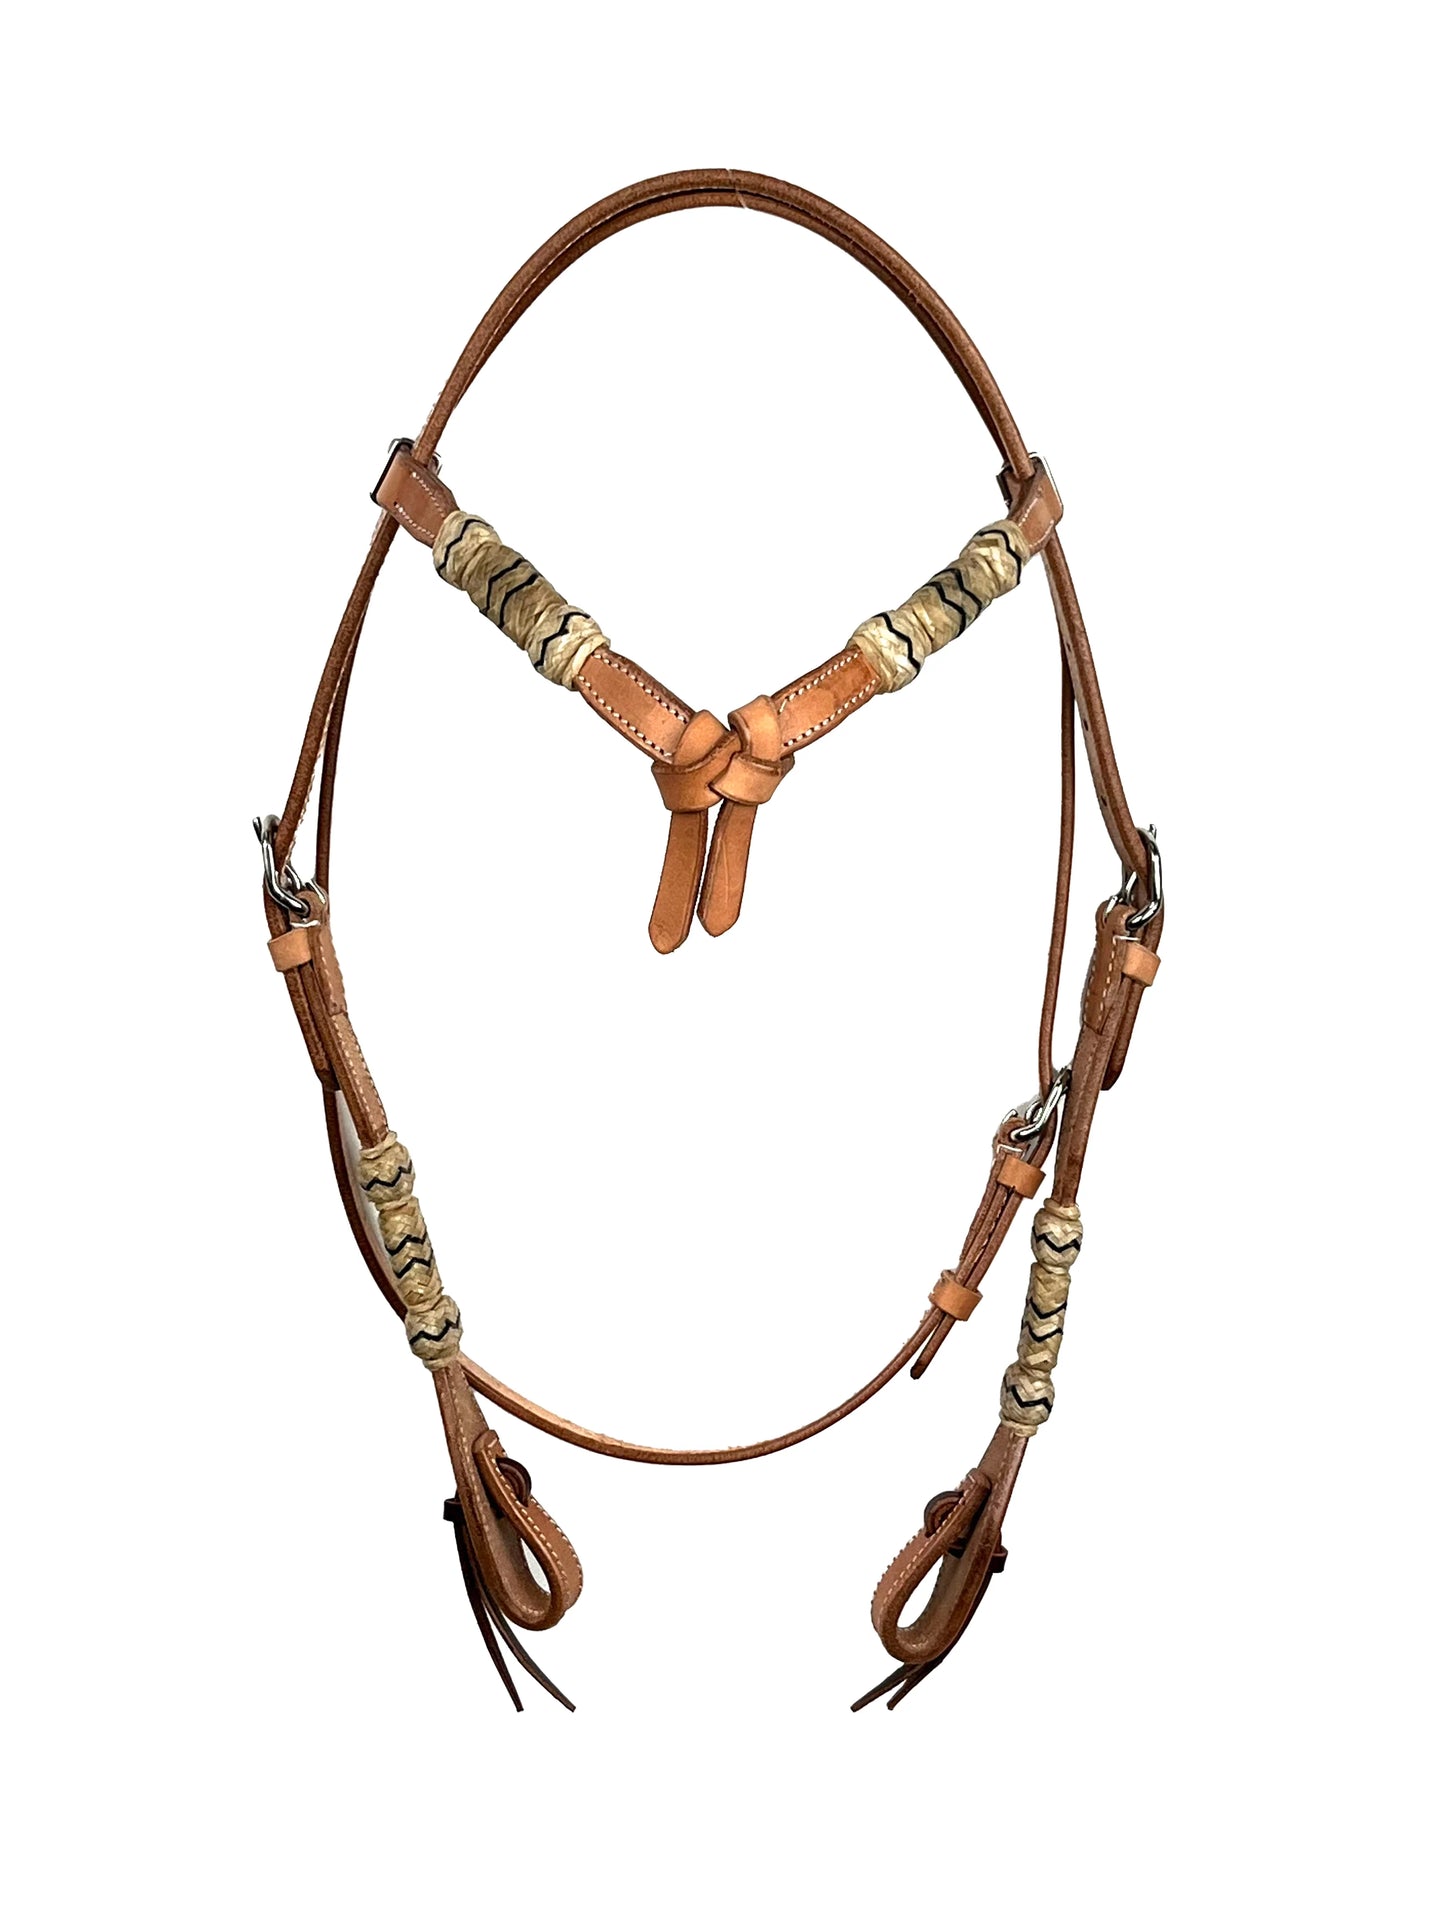 Ezy Ride Bridle with Futurity Knot and Rawhde Brow Natural - NE-AC-101